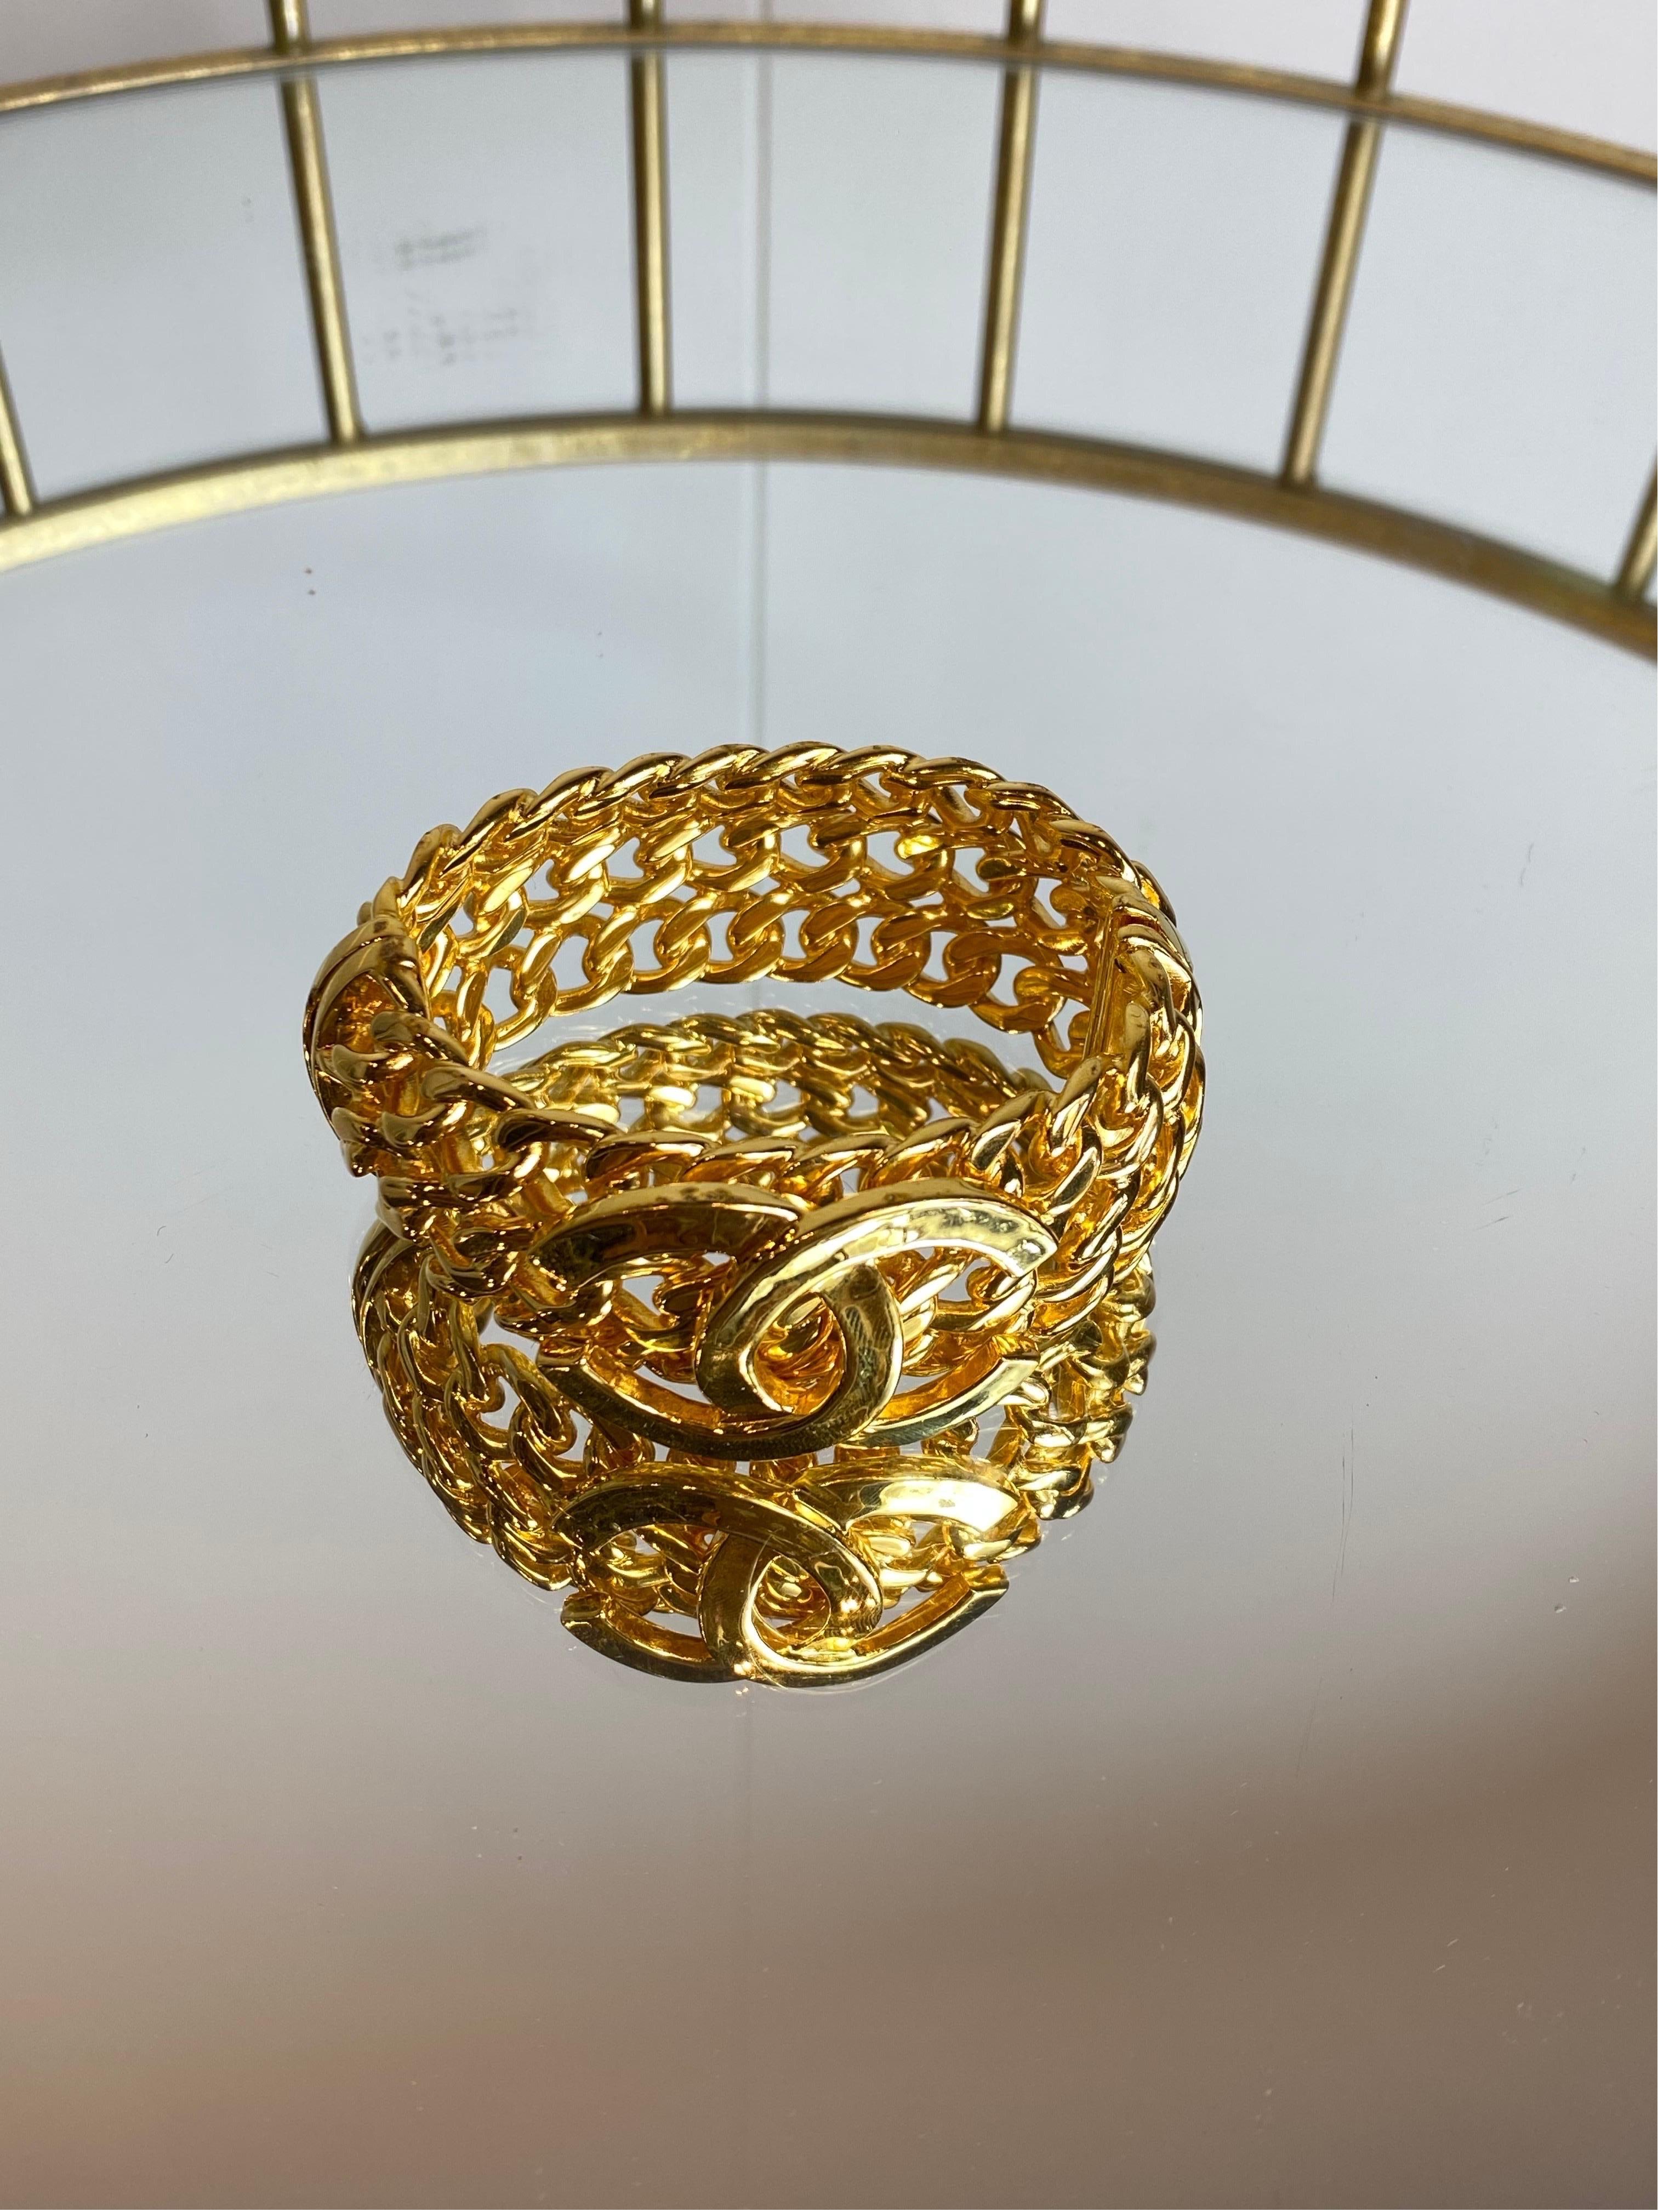 Chanel bracelet.
Featuring 3 golden metal chains.
Features magnetic closure.
Circumference measurements: 7 cm X 5 cm.
Height: 3cm
Excellent general condition, with signs of normal use and some small blackening as shown in the photos.